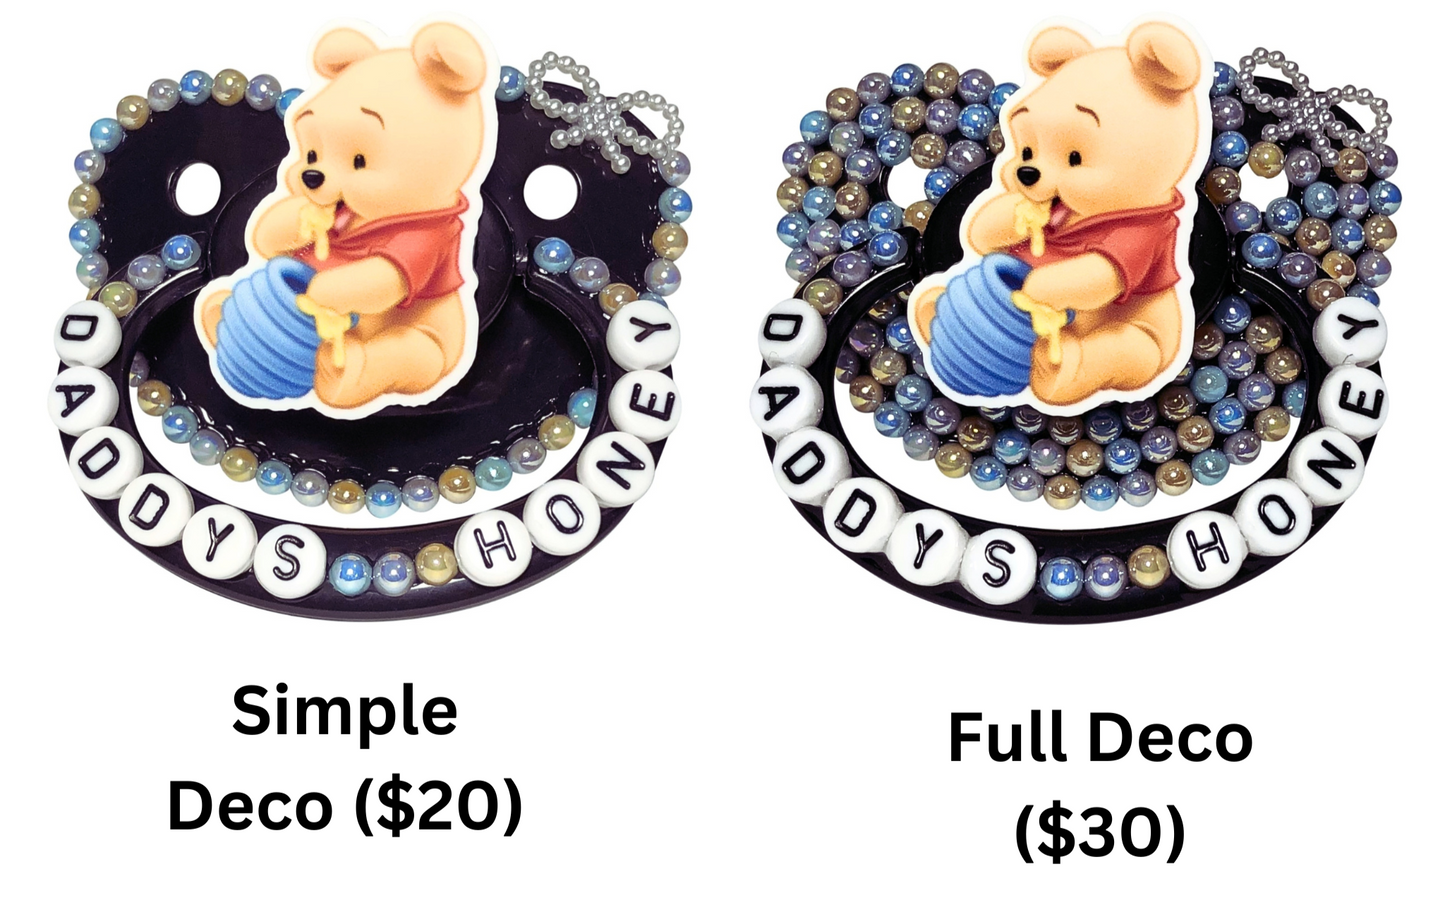 Baby Bear Pacis Adult Pacifier "Daddy's Honey" Black Winnie the Pooh Adult Paci (DDLG/ABDL)